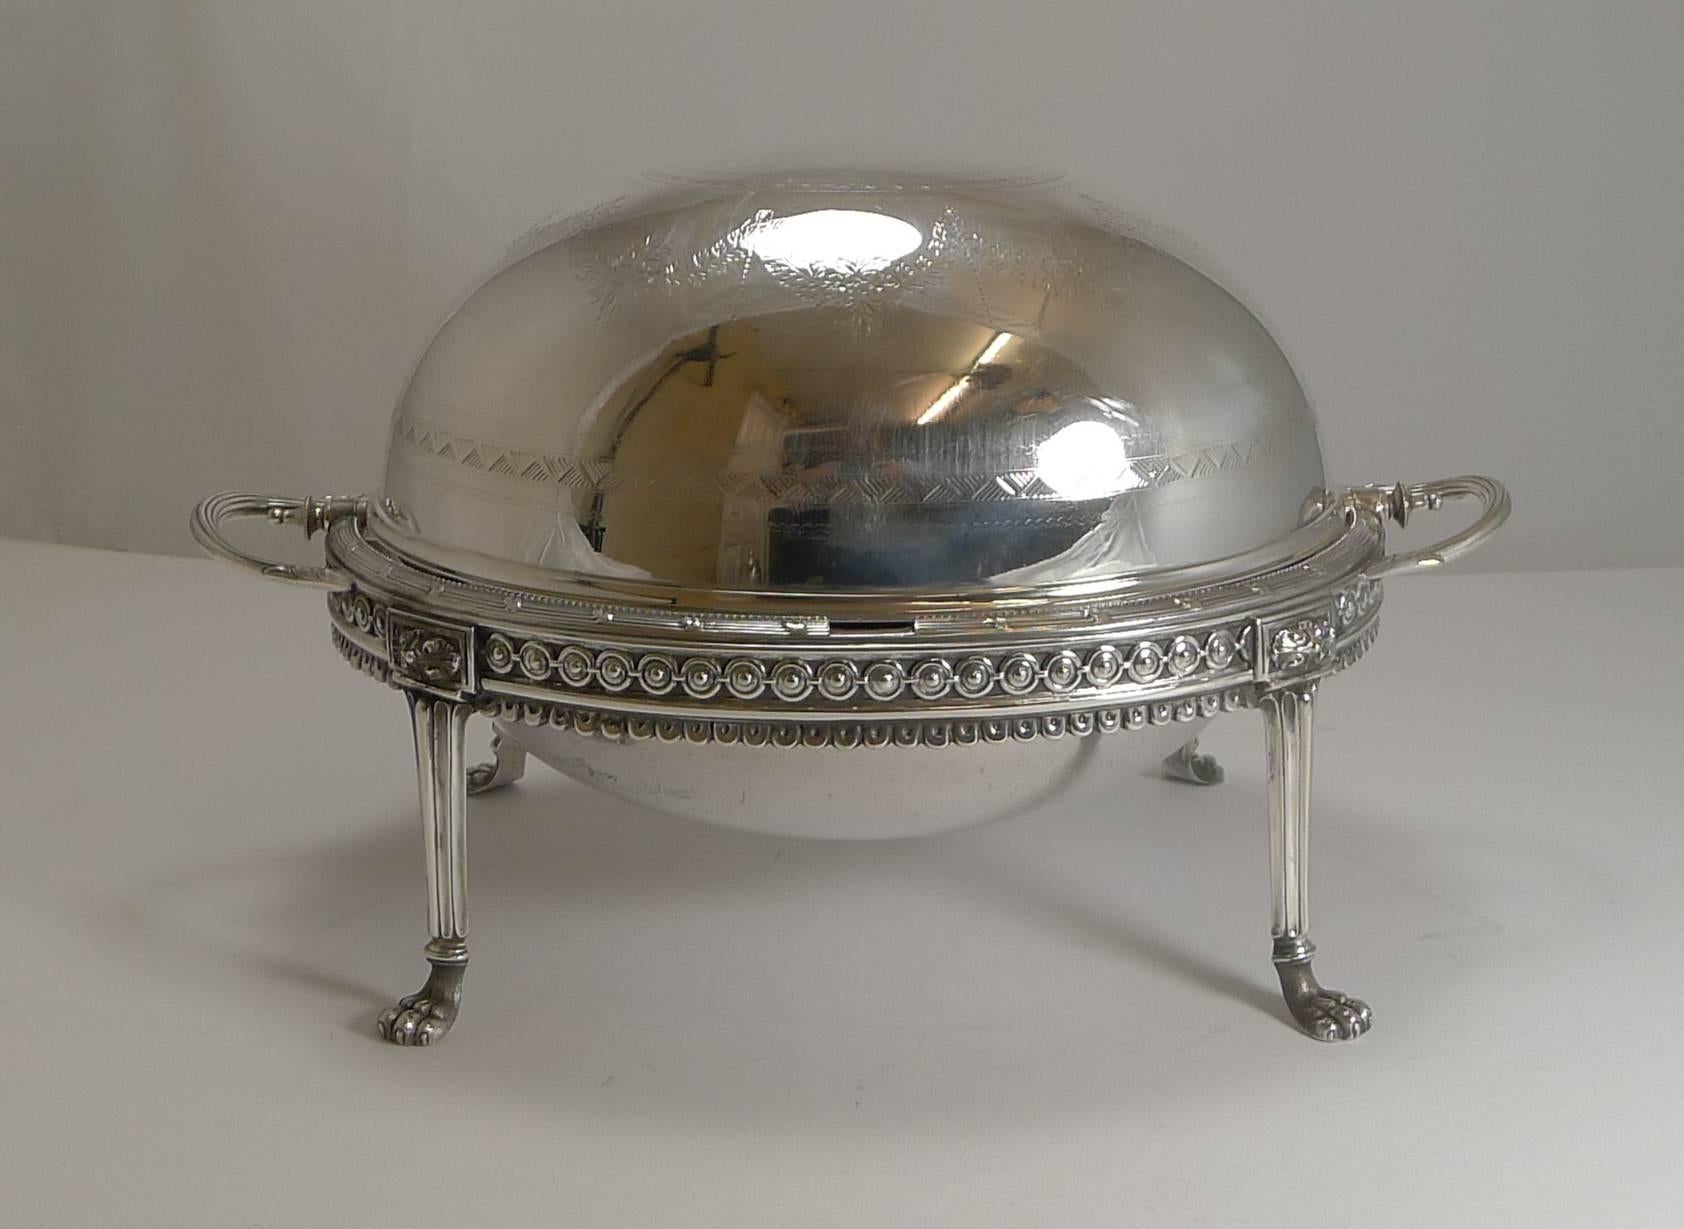 19th Century Antique English Silver Plated Revolving Breakfast Dish, Dated April 5th, 1880